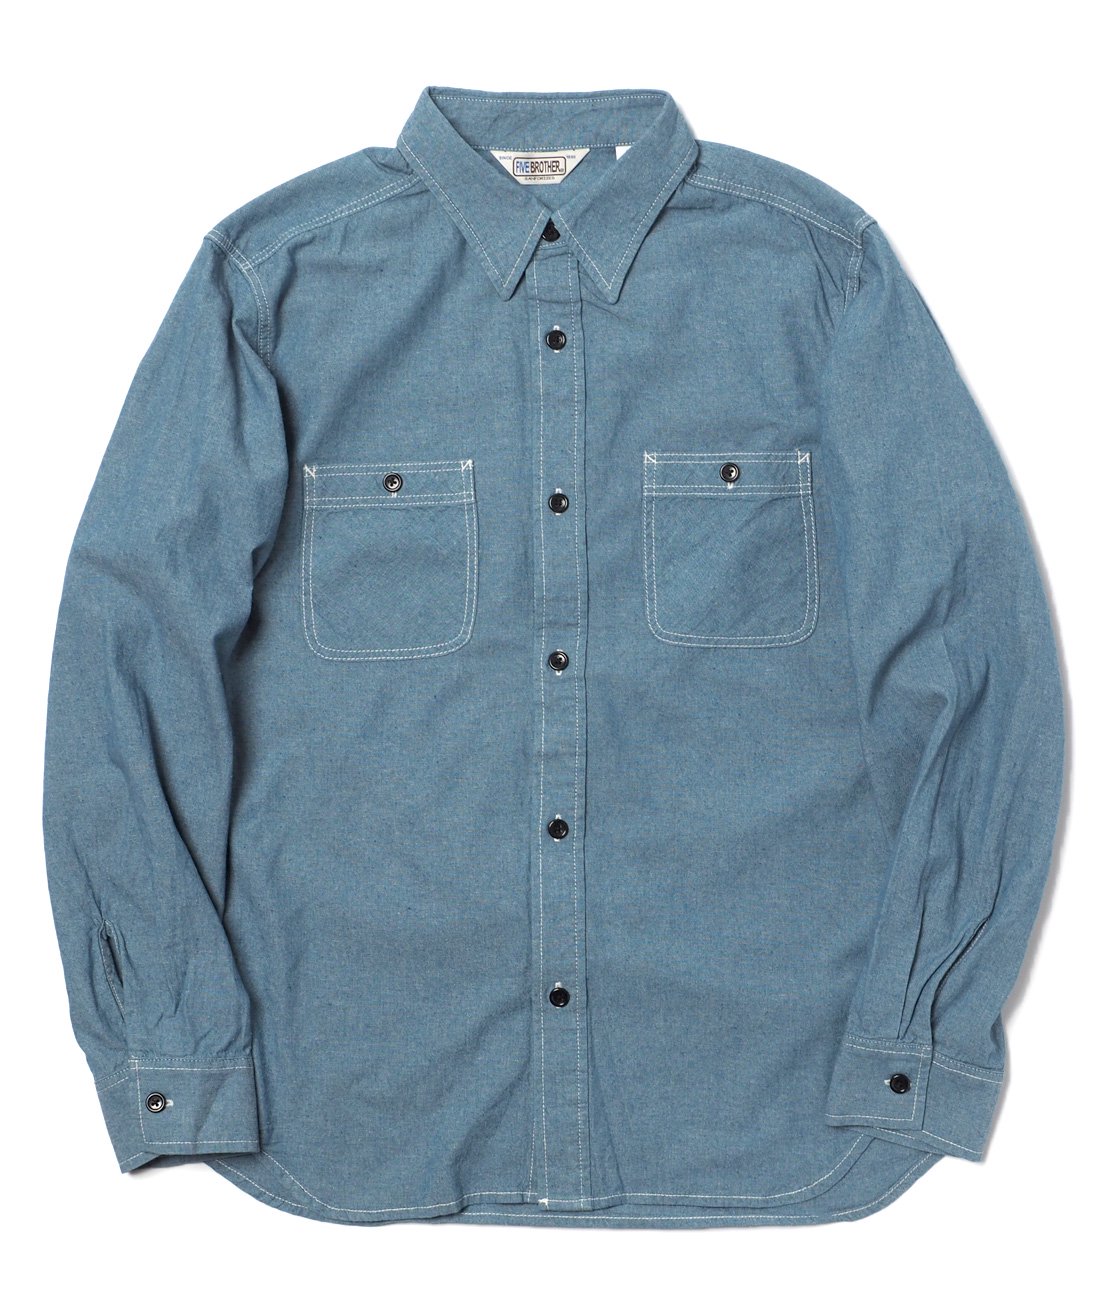 FIVE BROTHER】CHAMBRAY WORK SHIRT - BLUE シャンブレーワークシャツ ...